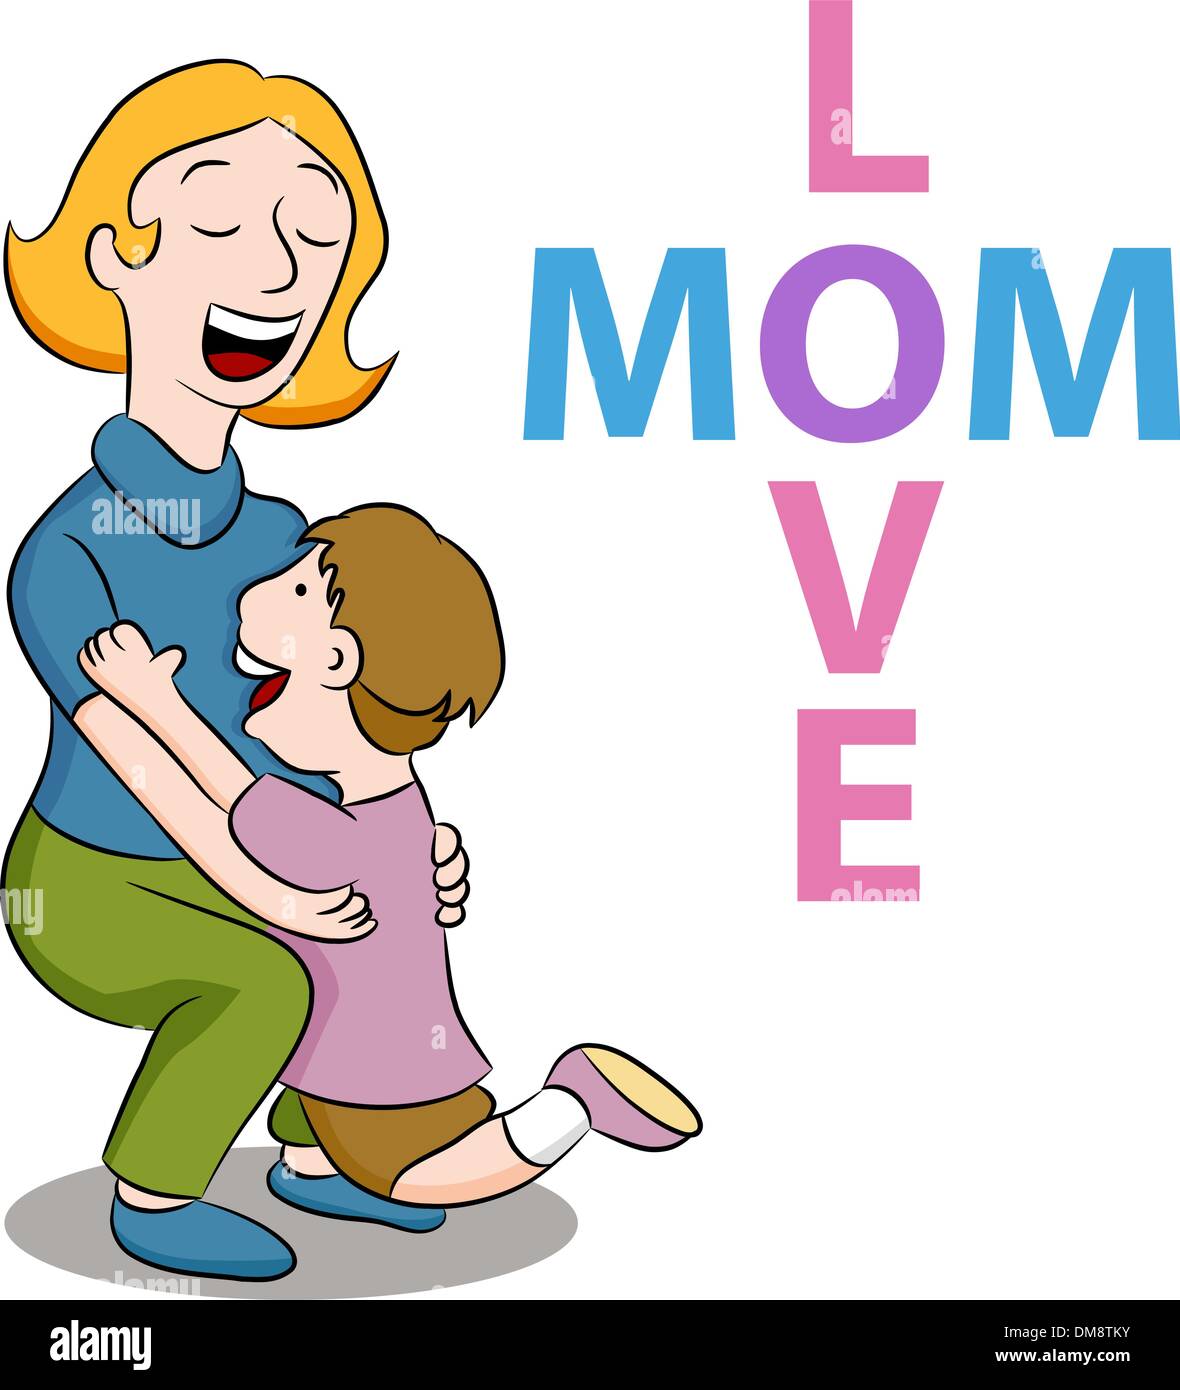 Mother love this faty momy images